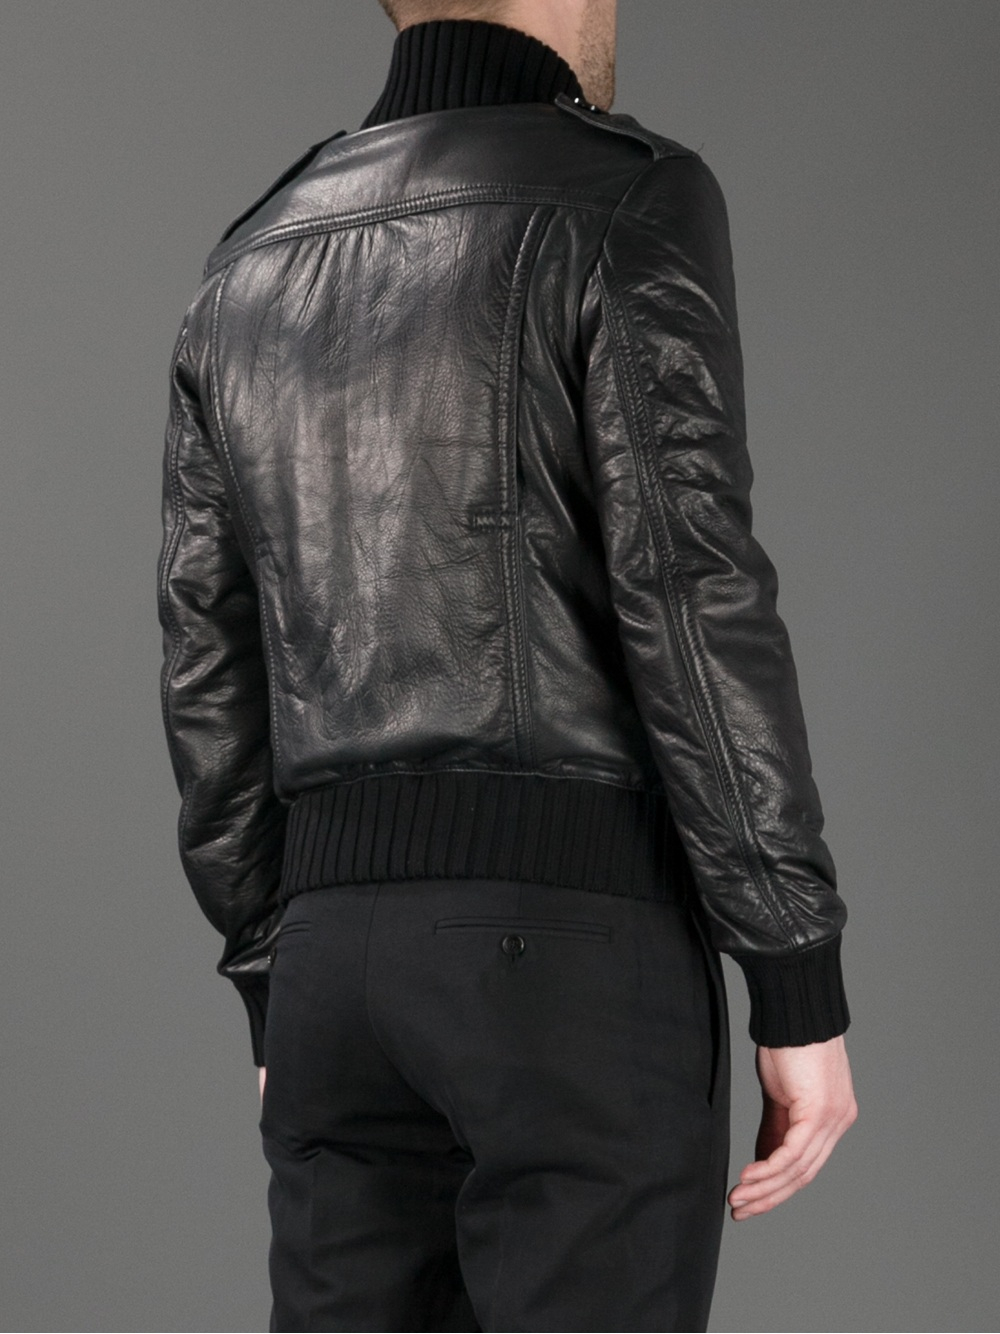 Gucci Leather Jacket in Black for Men - Lyst